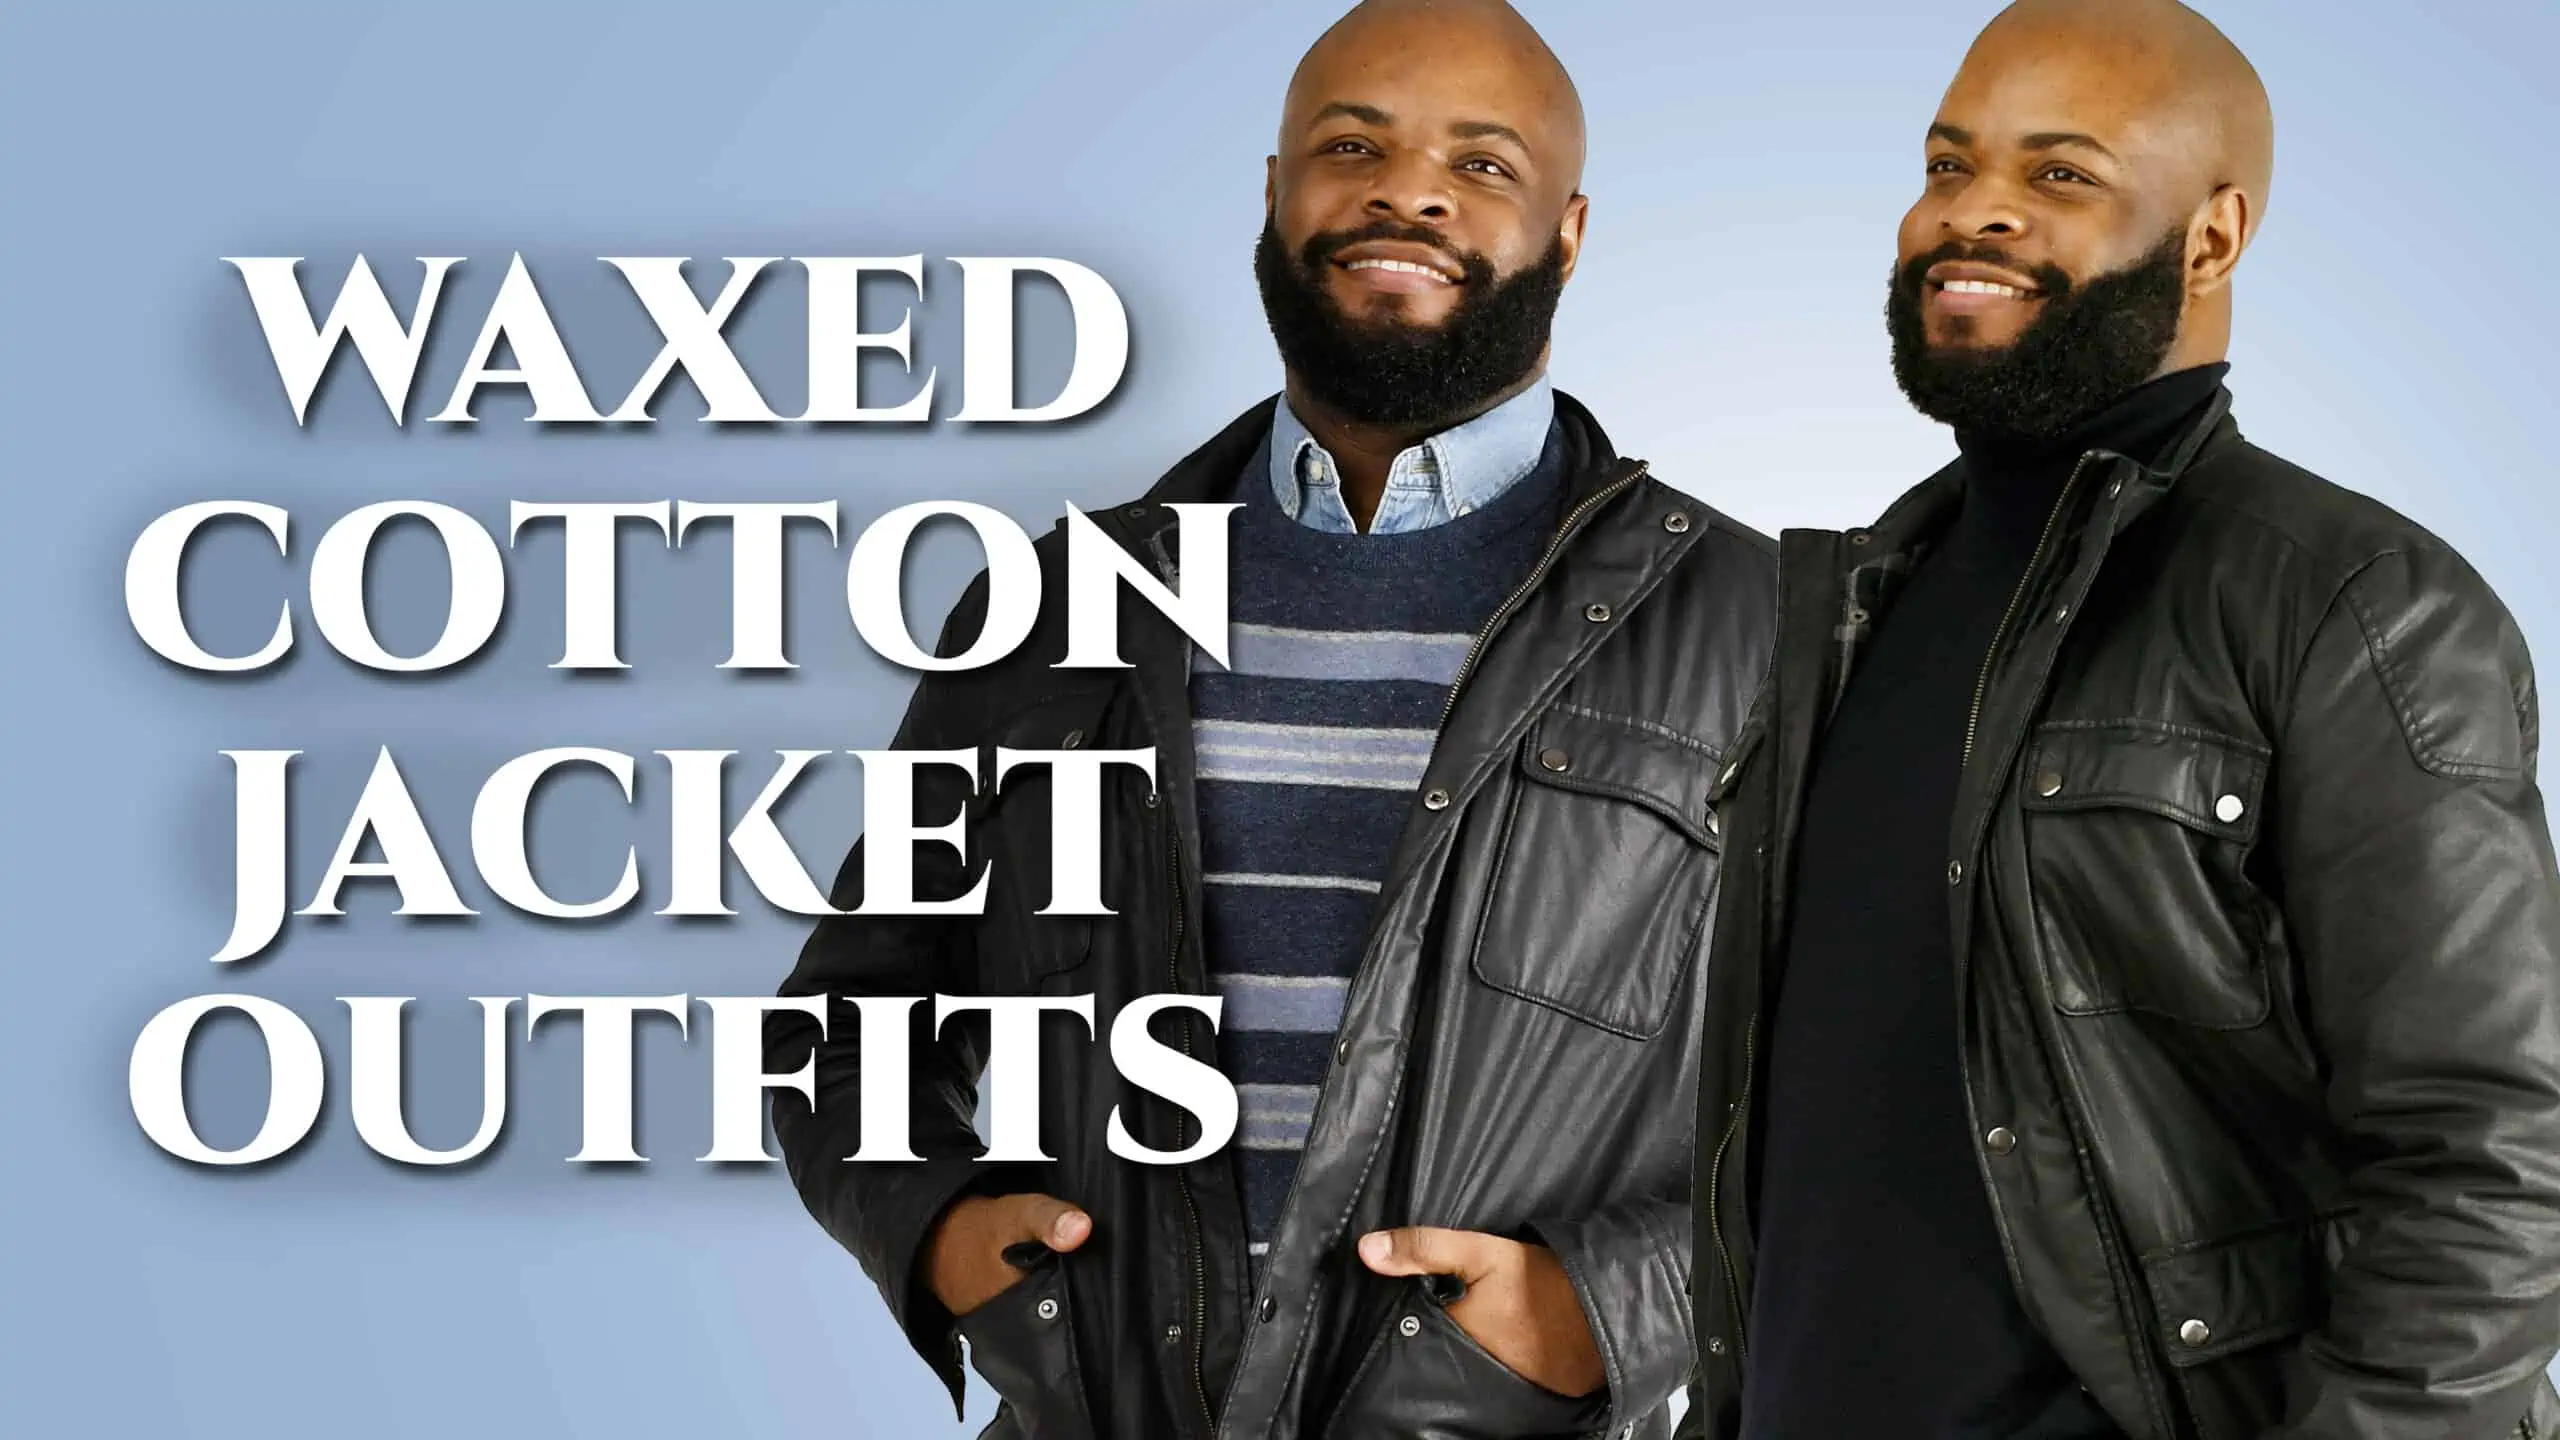 waxed cotton jacket outfits 3840x2160 scaled